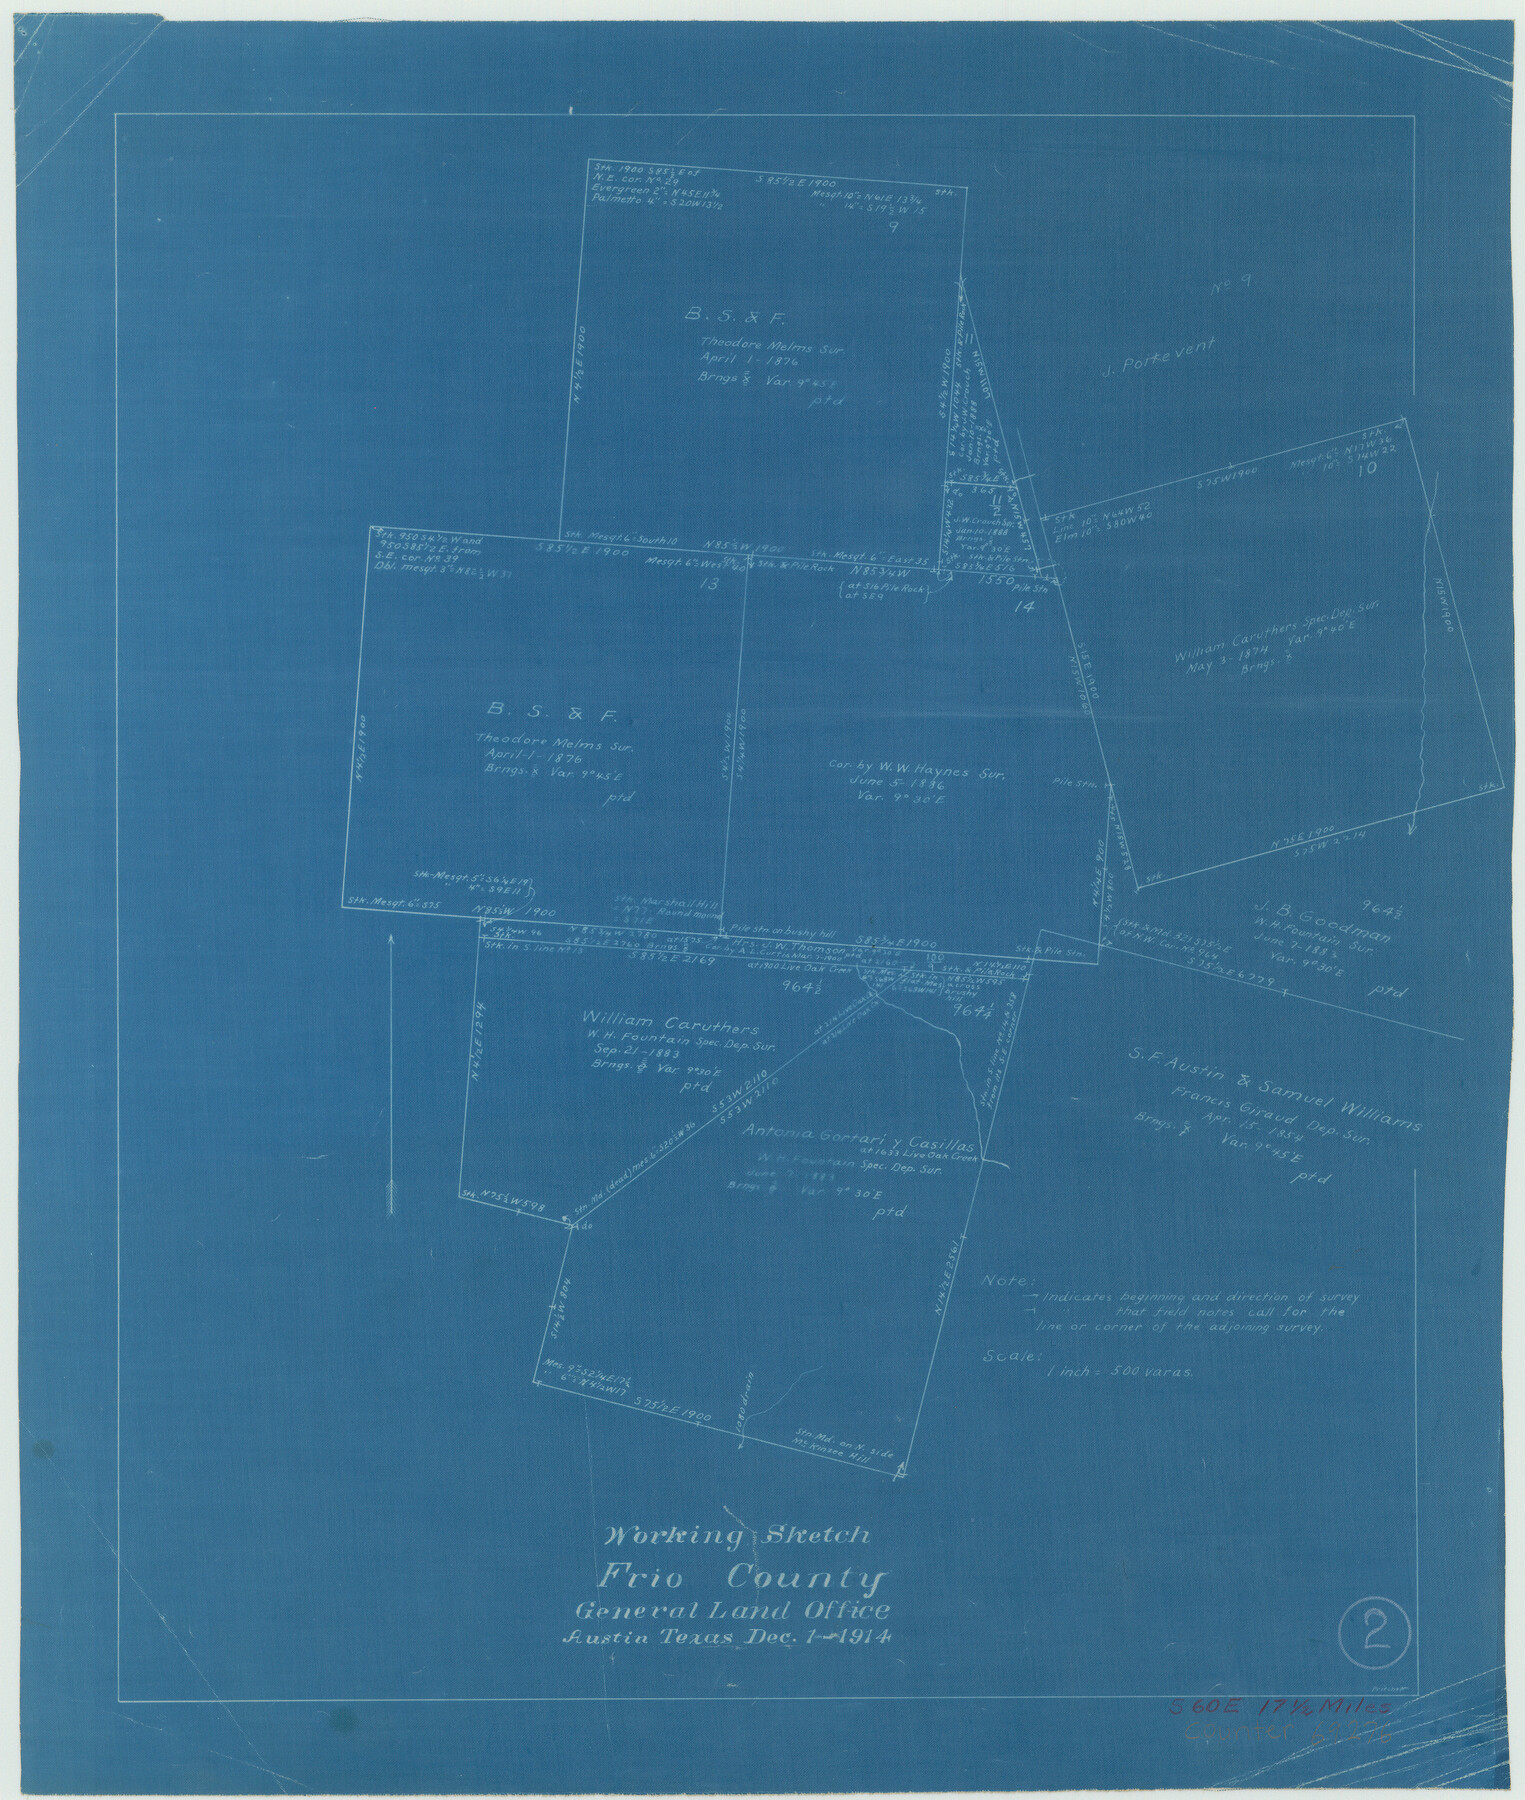 69276, Frio County Working Sketch 2, General Map Collection